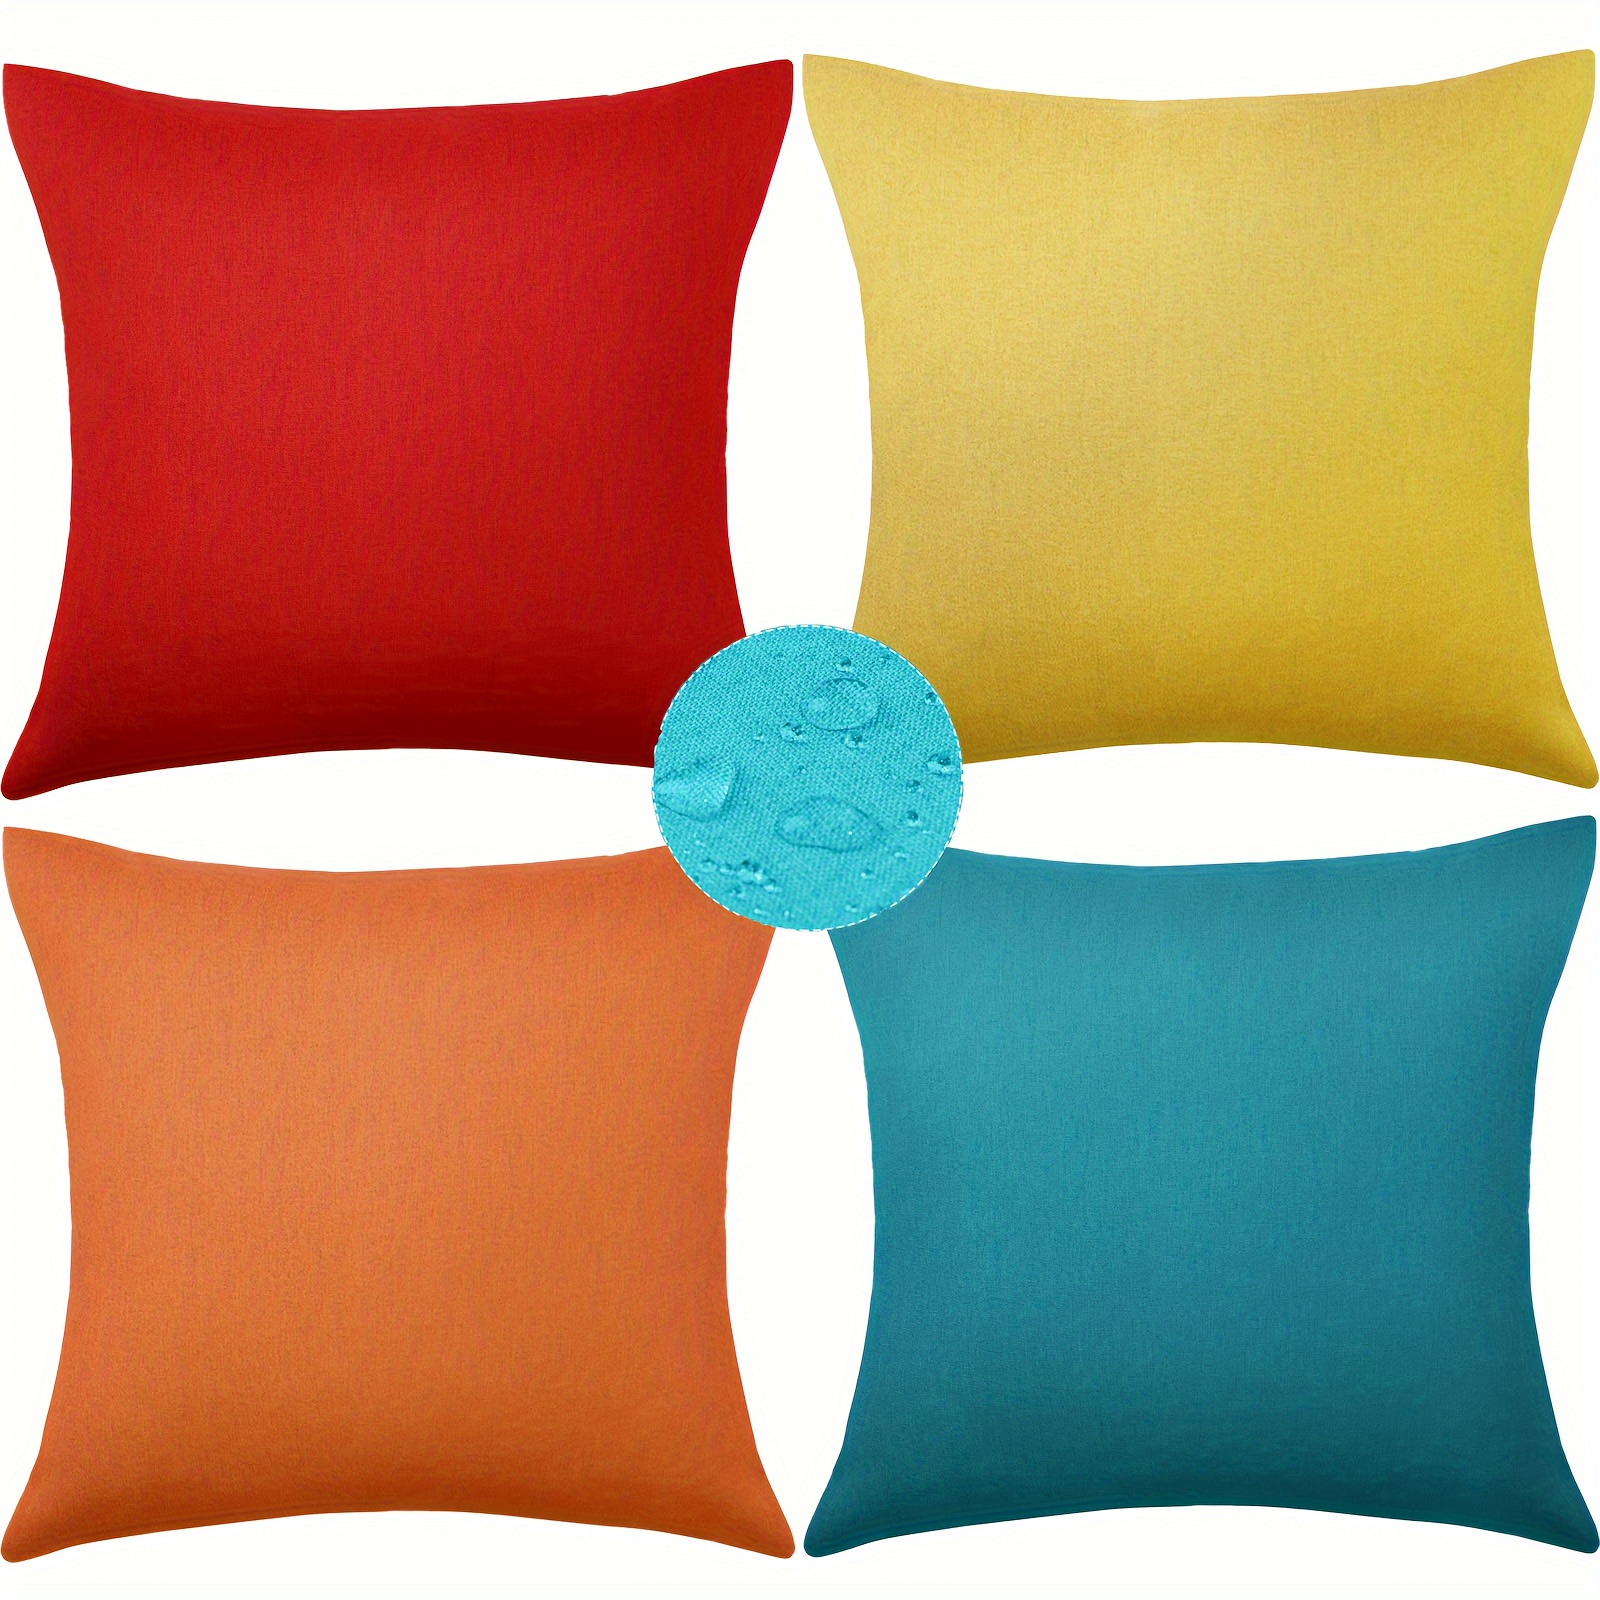 

Set Of 4 Waterproof Outdoor Throw Pillow Covers - Decorative Square Cushion Cases For Patio, Balcony & Garden, Durable Pu Coating, Zip Closure, Dry Clean Only, 18x18 Inches